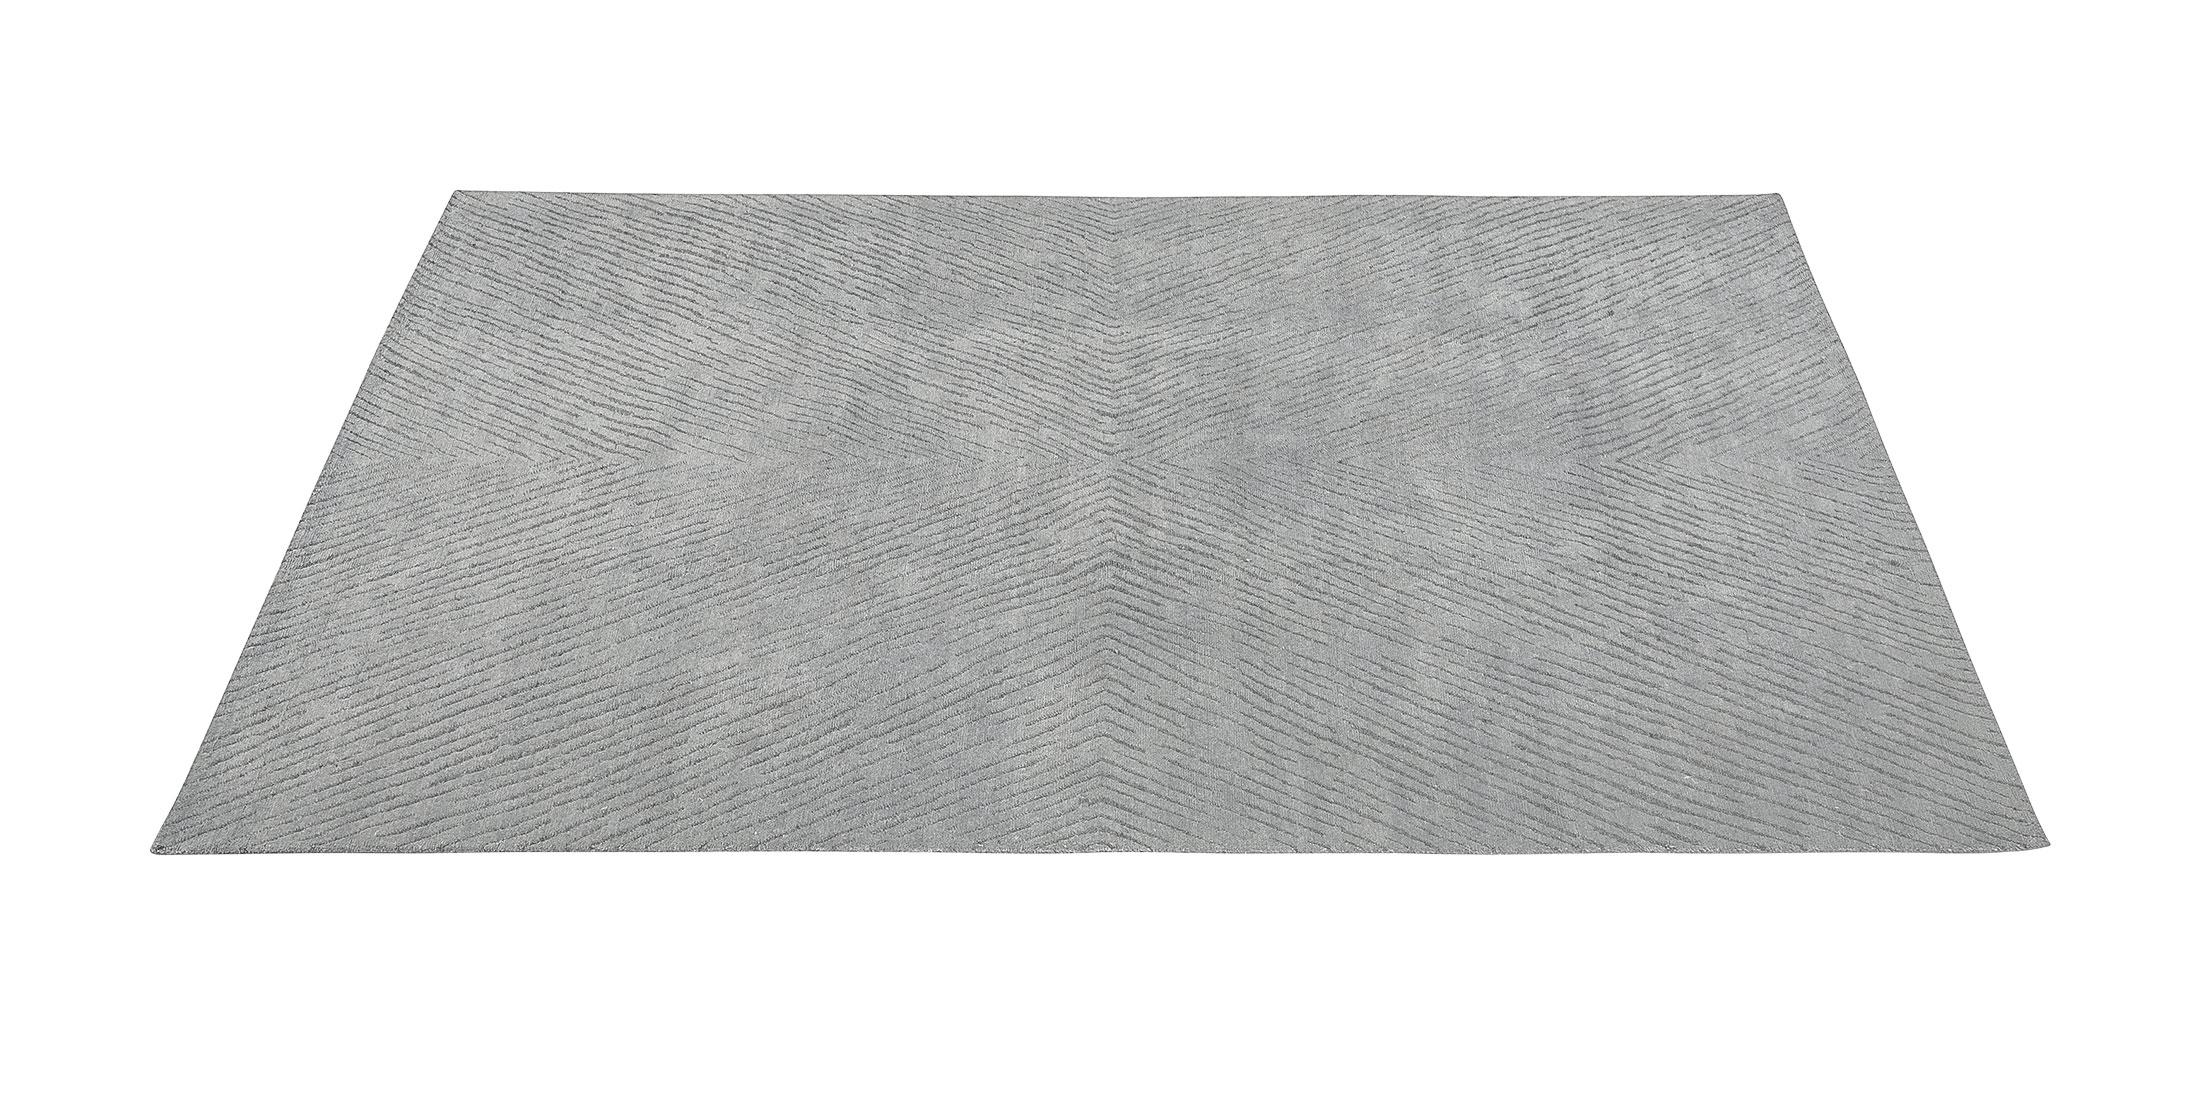 For Sale: Gray (Nickel/Carbon) Ben Soleimani Performance Setta Rug– Handknotted Soft Pile Nickel/Carbon 6'x9' 2